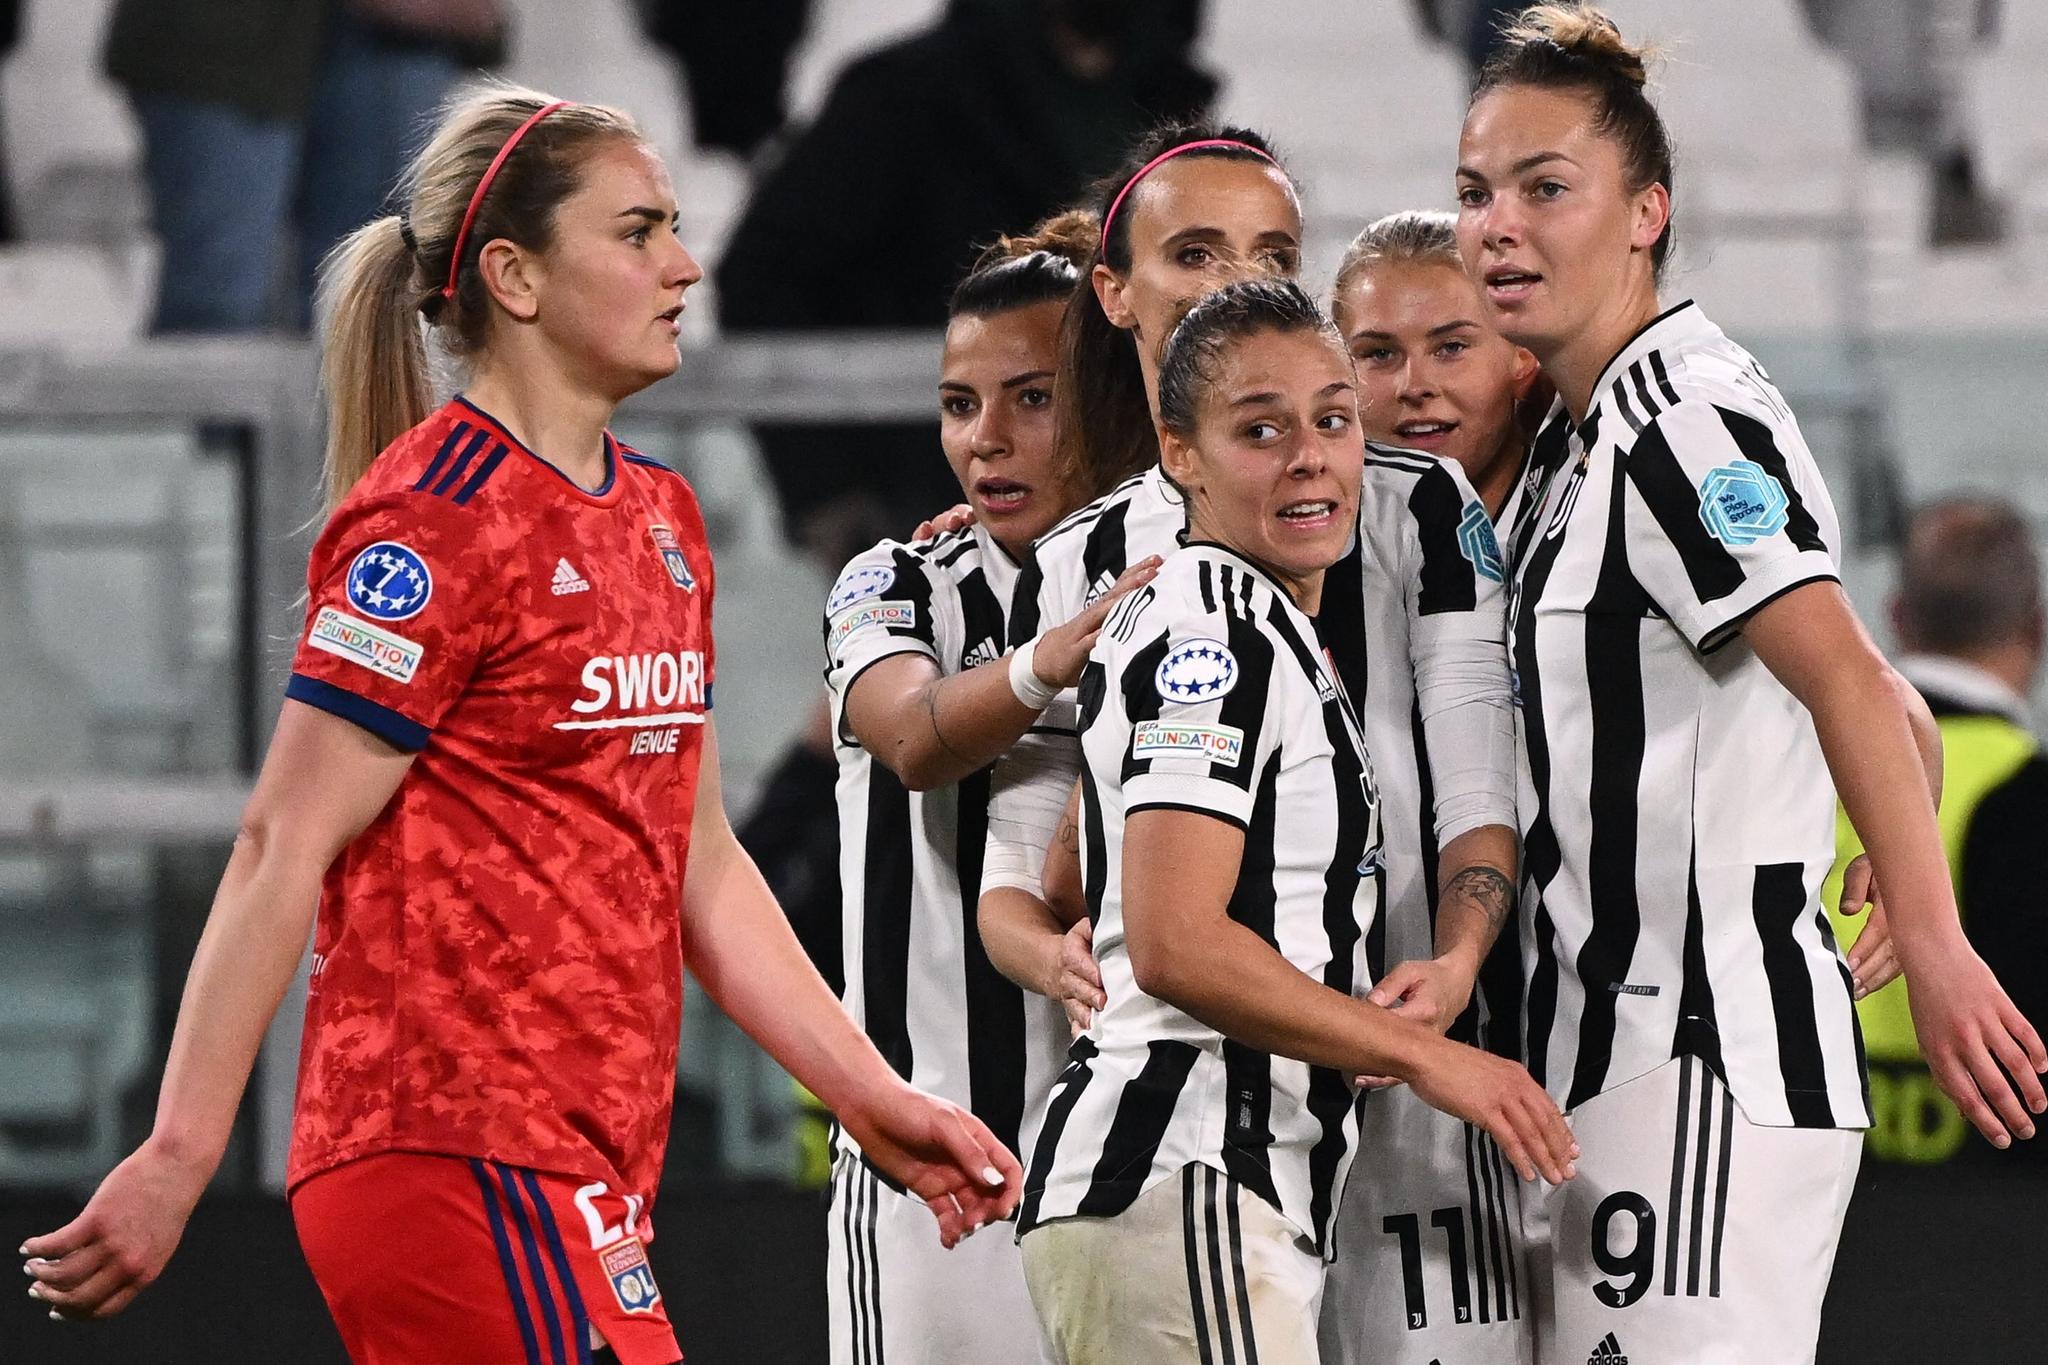 Surprise defeat for Hegerbergs Lyon after red card: